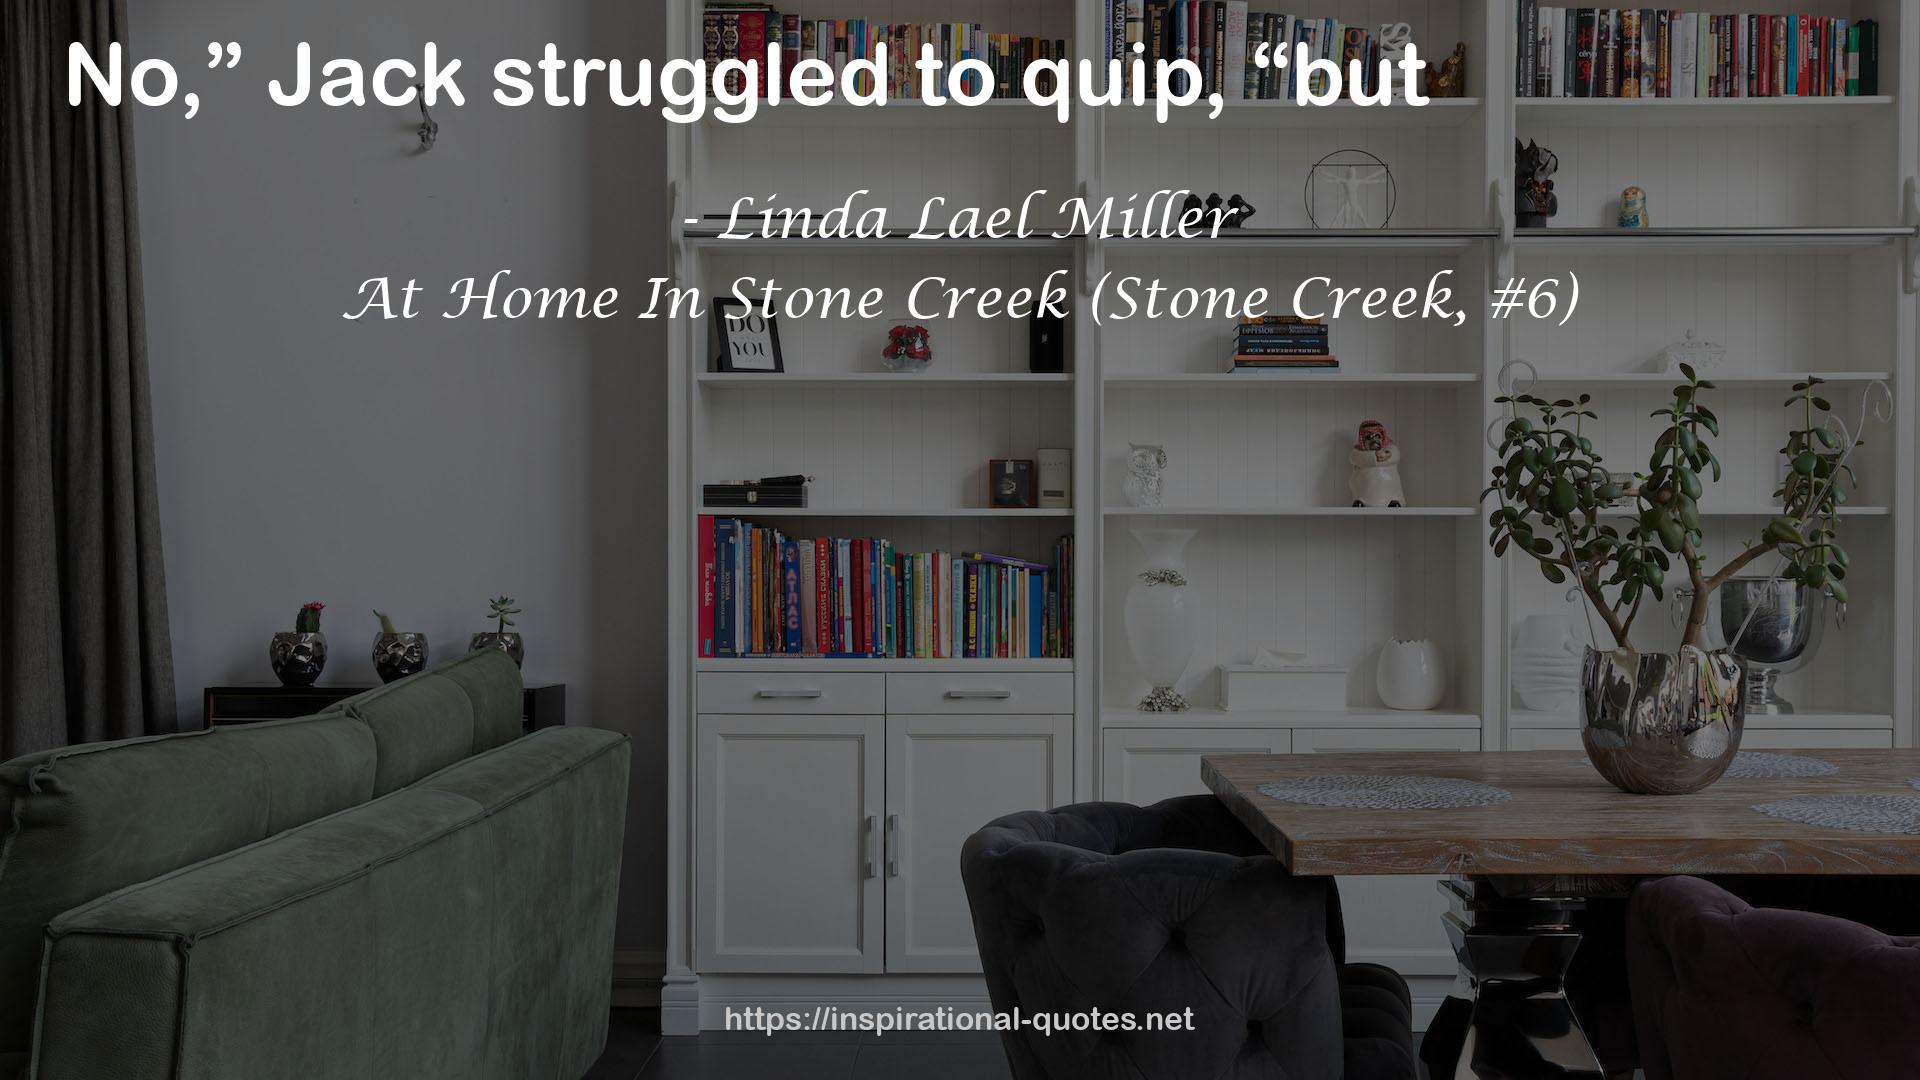 At Home In Stone Creek (Stone Creek, #6) QUOTES